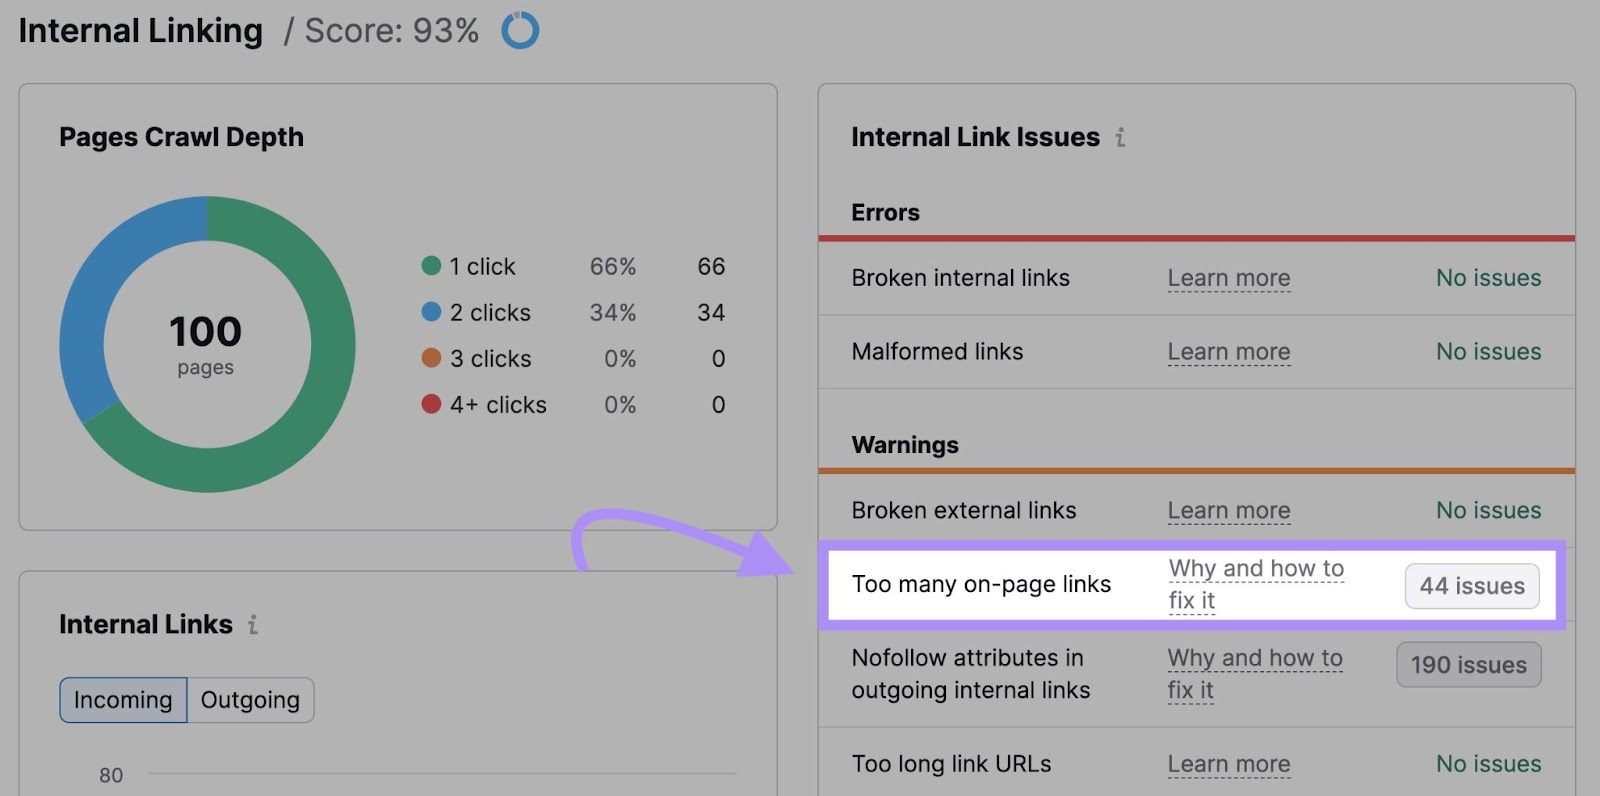 "Too many on-page links" result highlighted under "Internal Linking" report